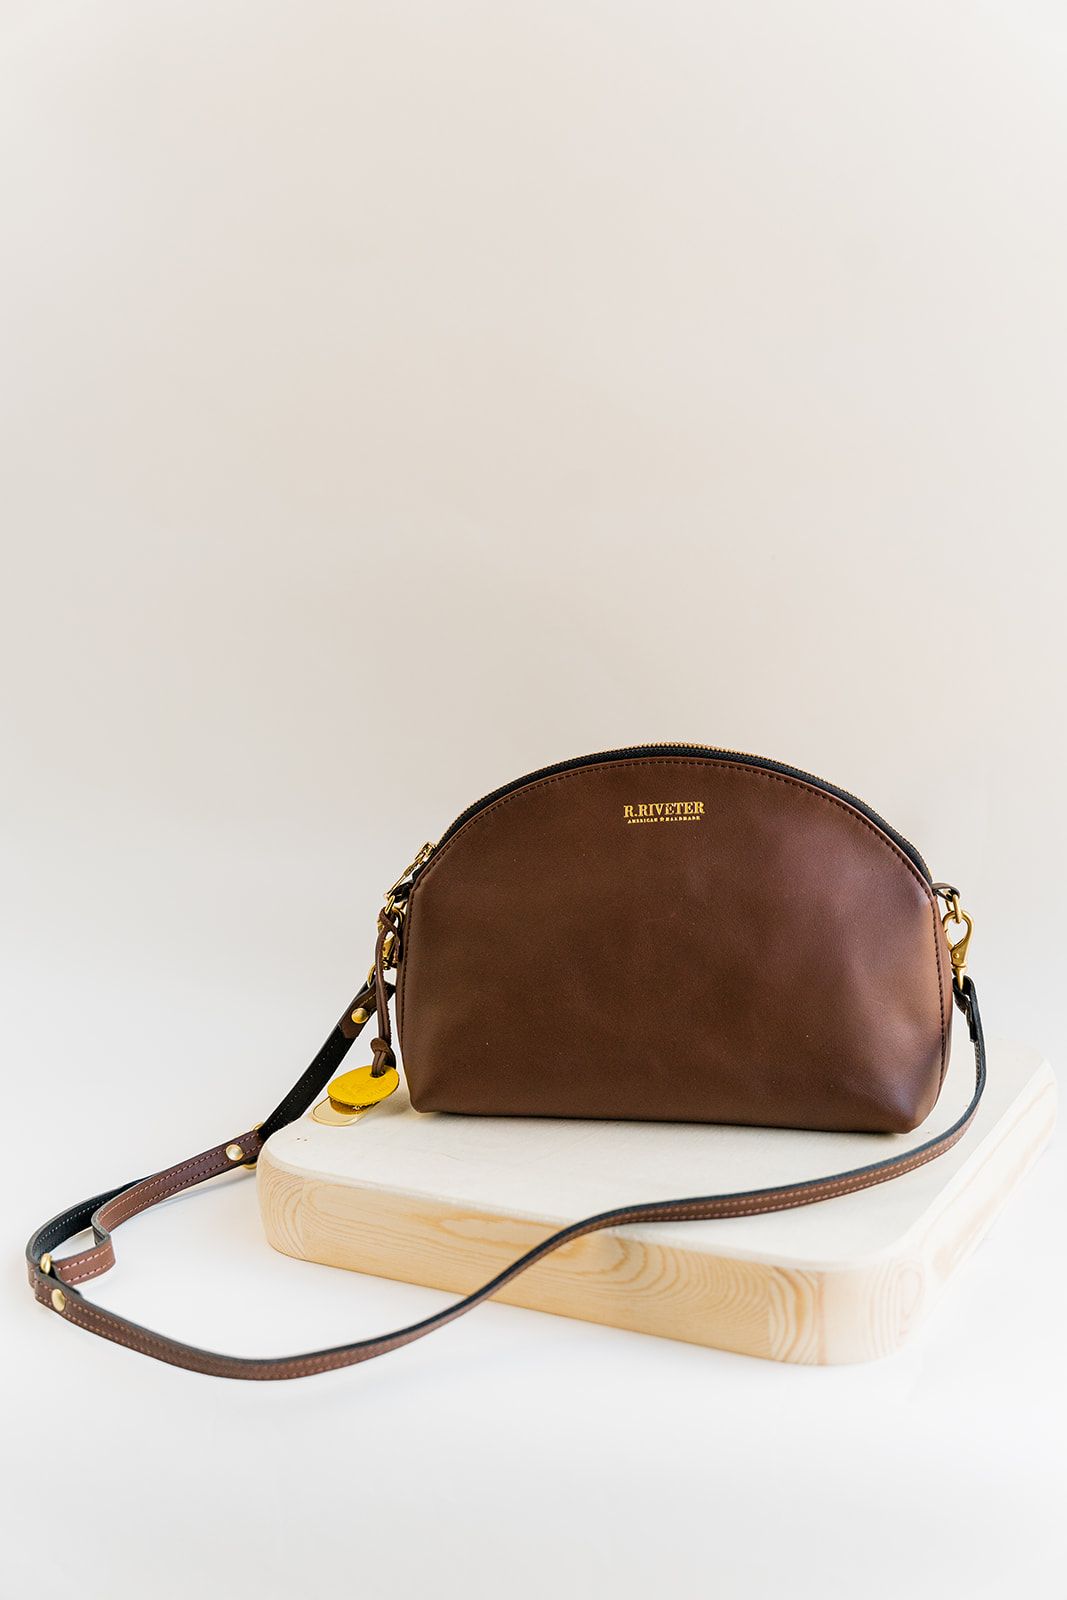 Hopper | Brown Leather